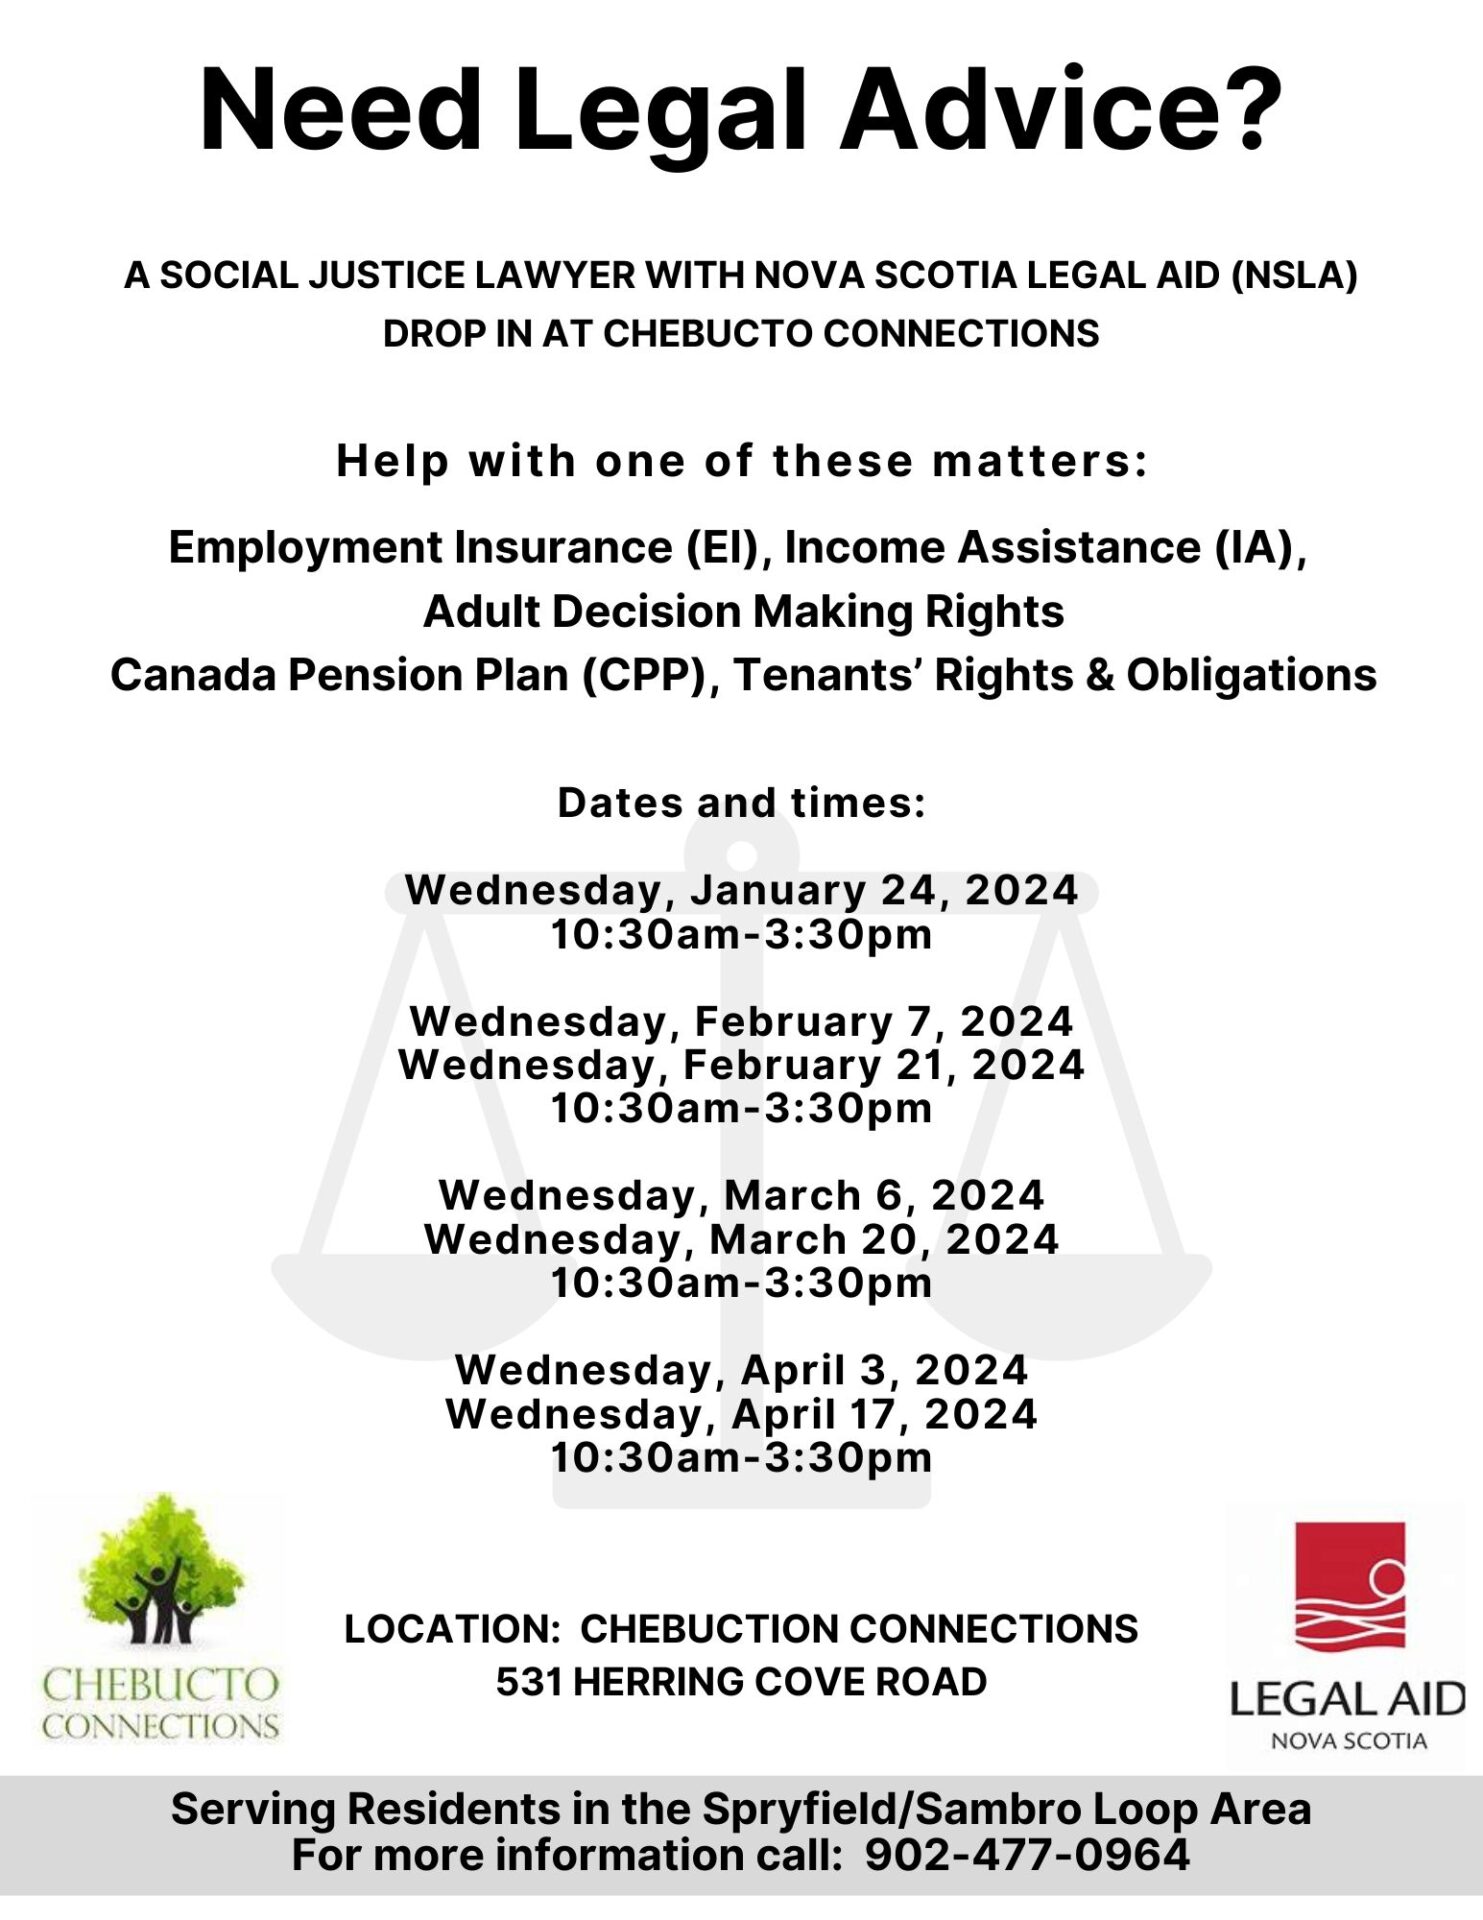 Upcoming legal advice sessions on social justice topics including employment insurance, income assistance, and pension rights at herring cove location, provided by nova scotia legal aid.